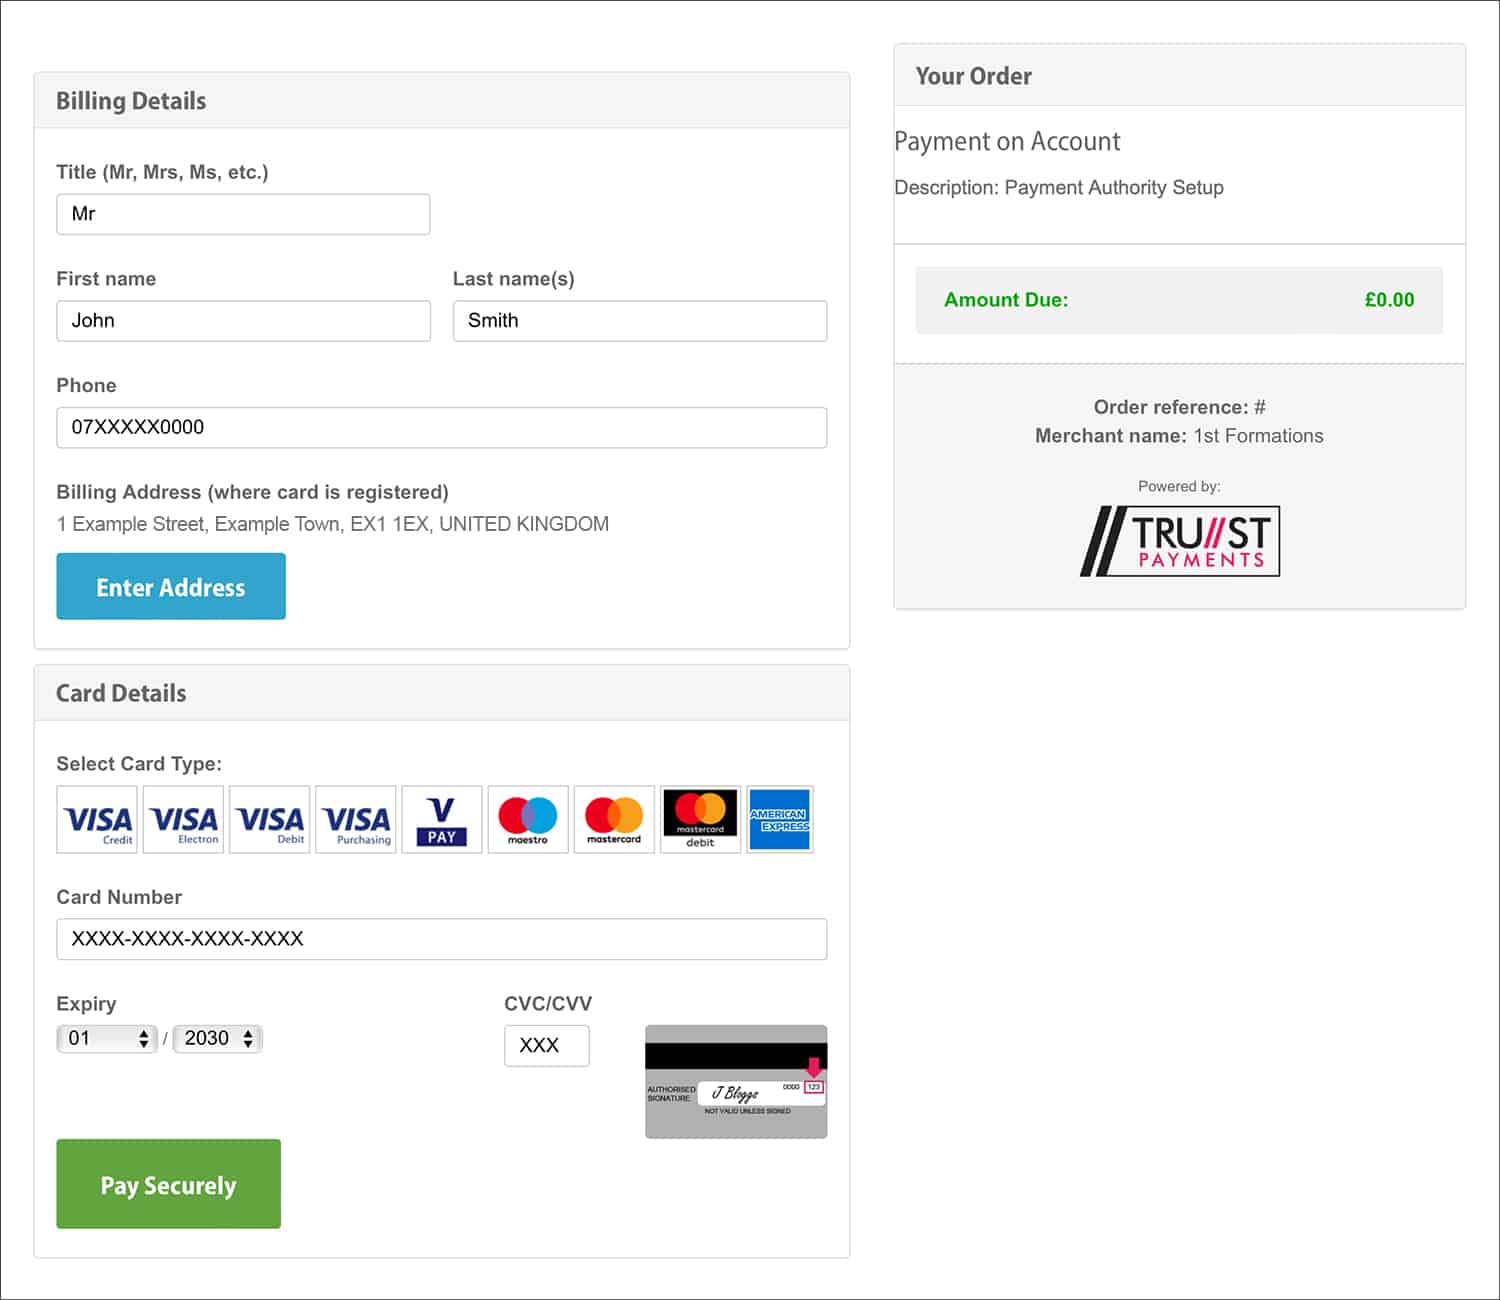 1st Formations Card Payment Page.